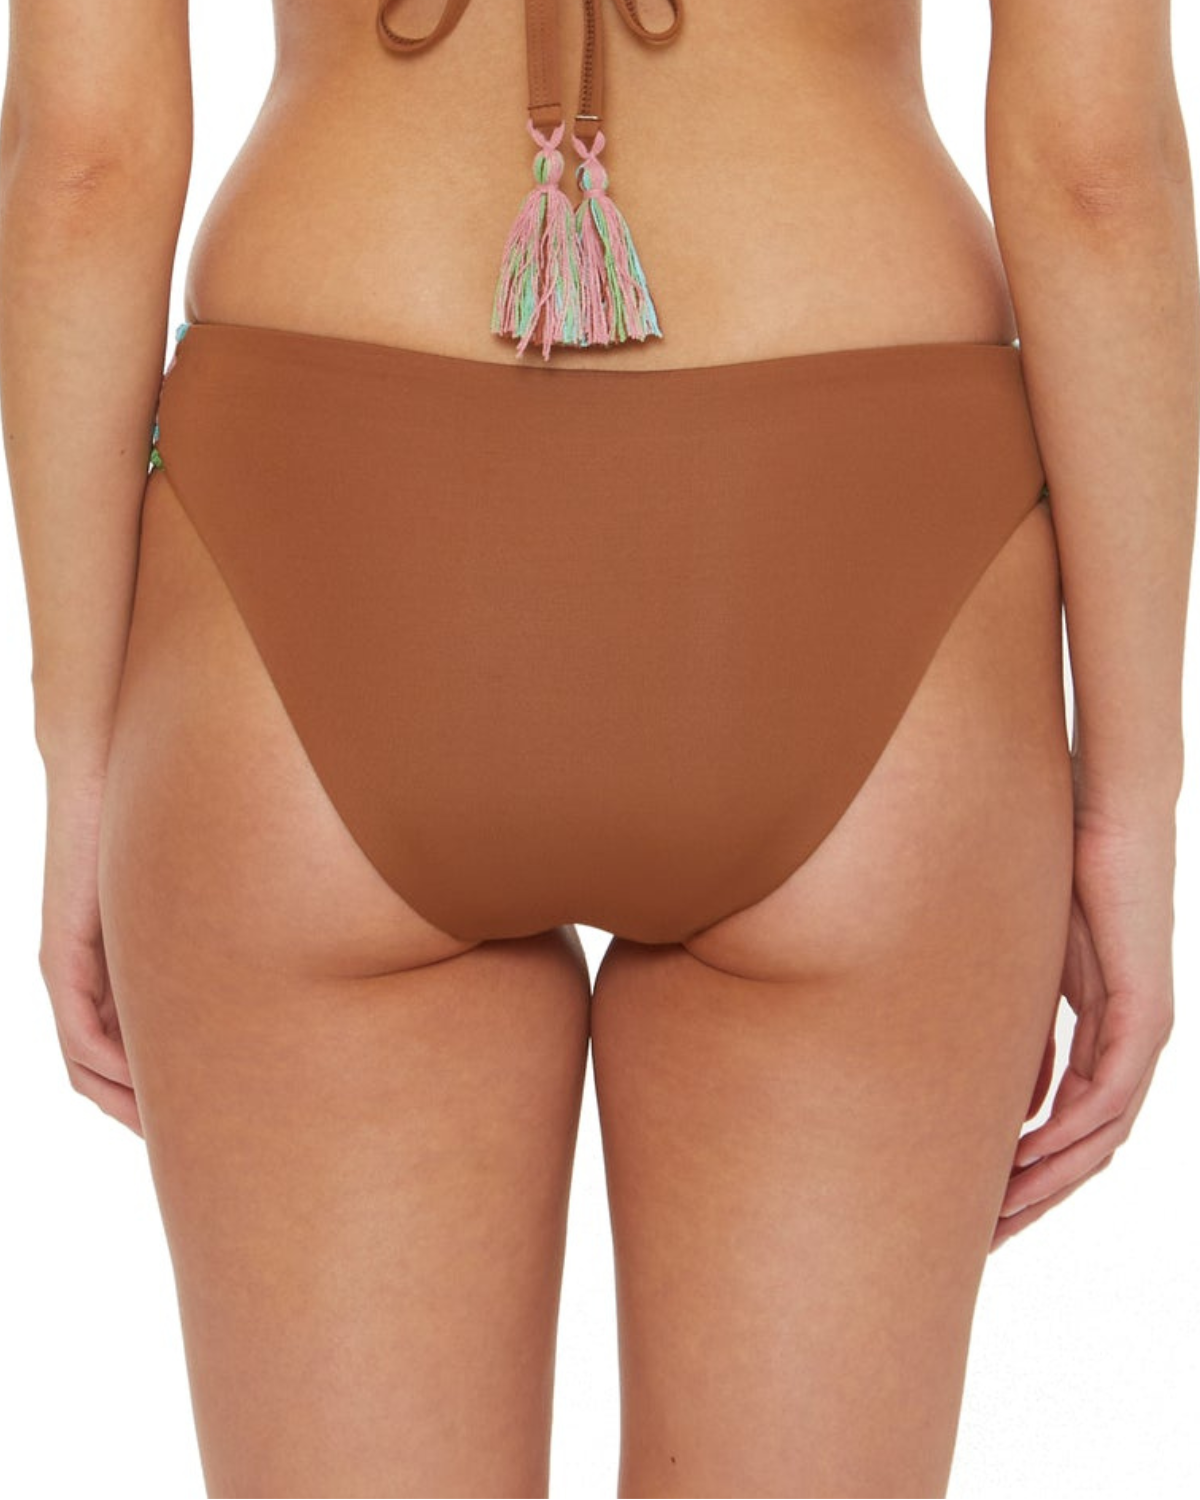 Model wearing a hipster bikini bottom in brown with crochet tab side detail in brown, turquoise, pink and green